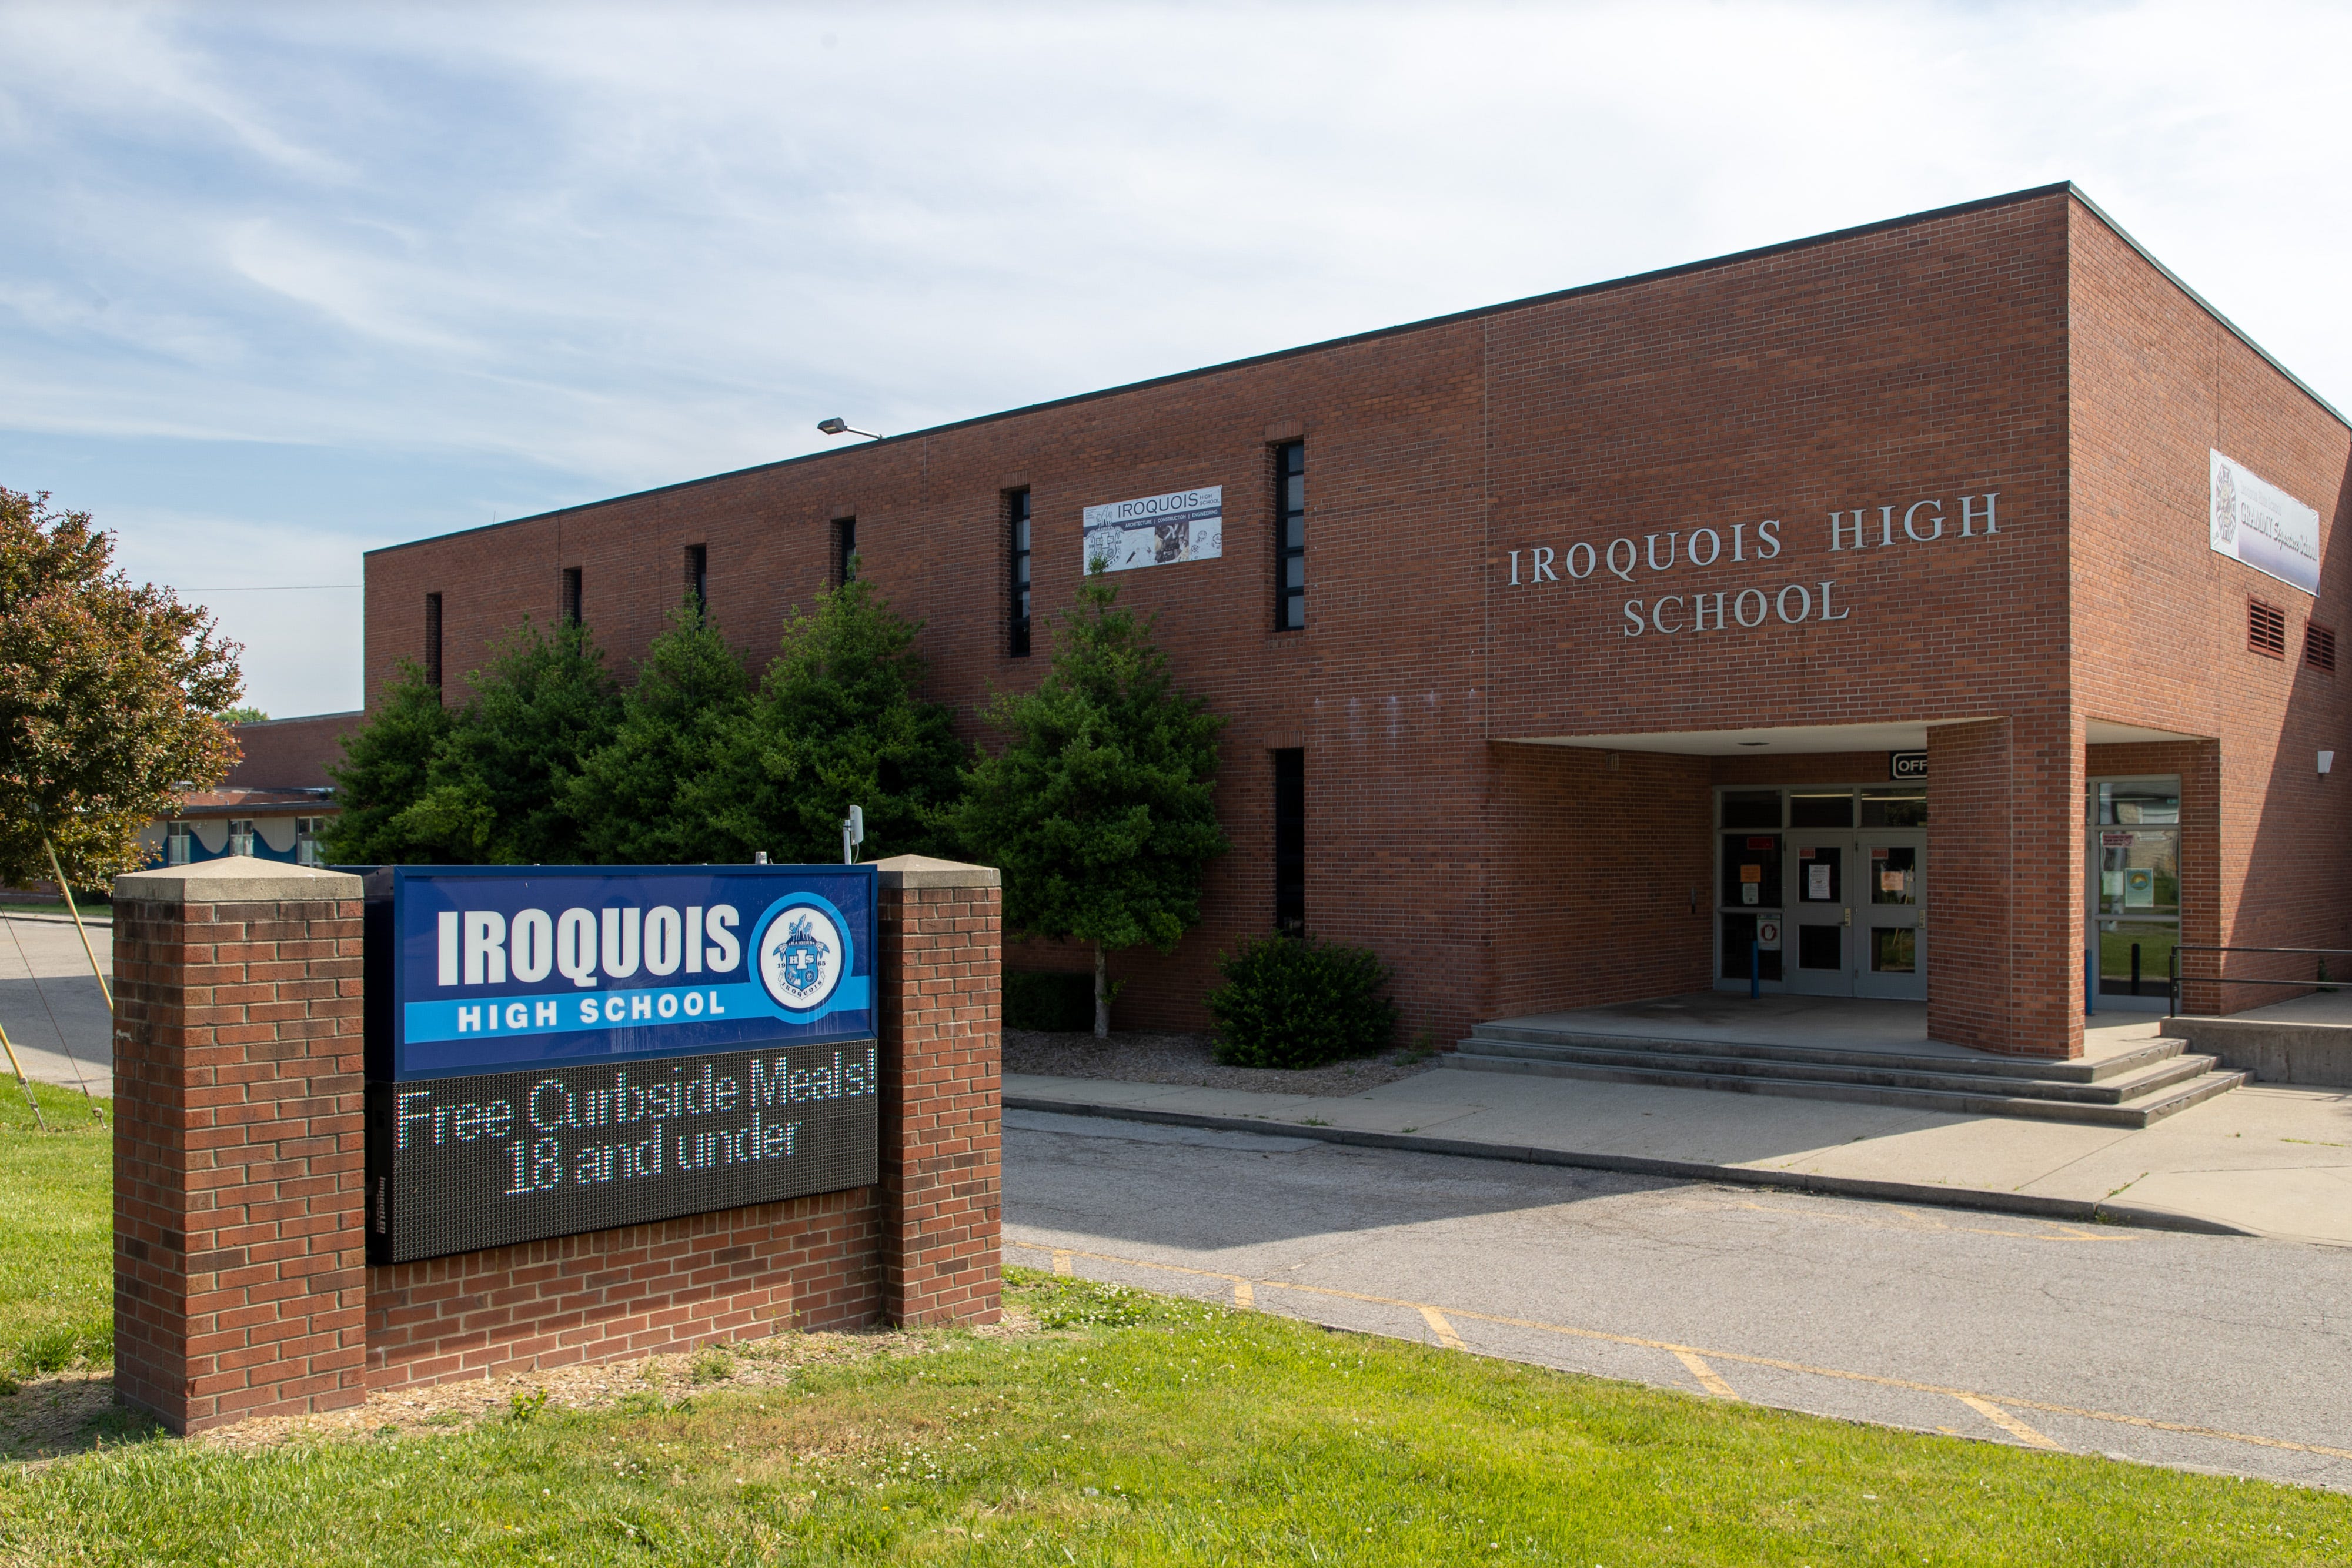 In 2020, students at Iroquois were 3.5 times as likely as those at duPont Manual to come from low-income households. May 25, 2021